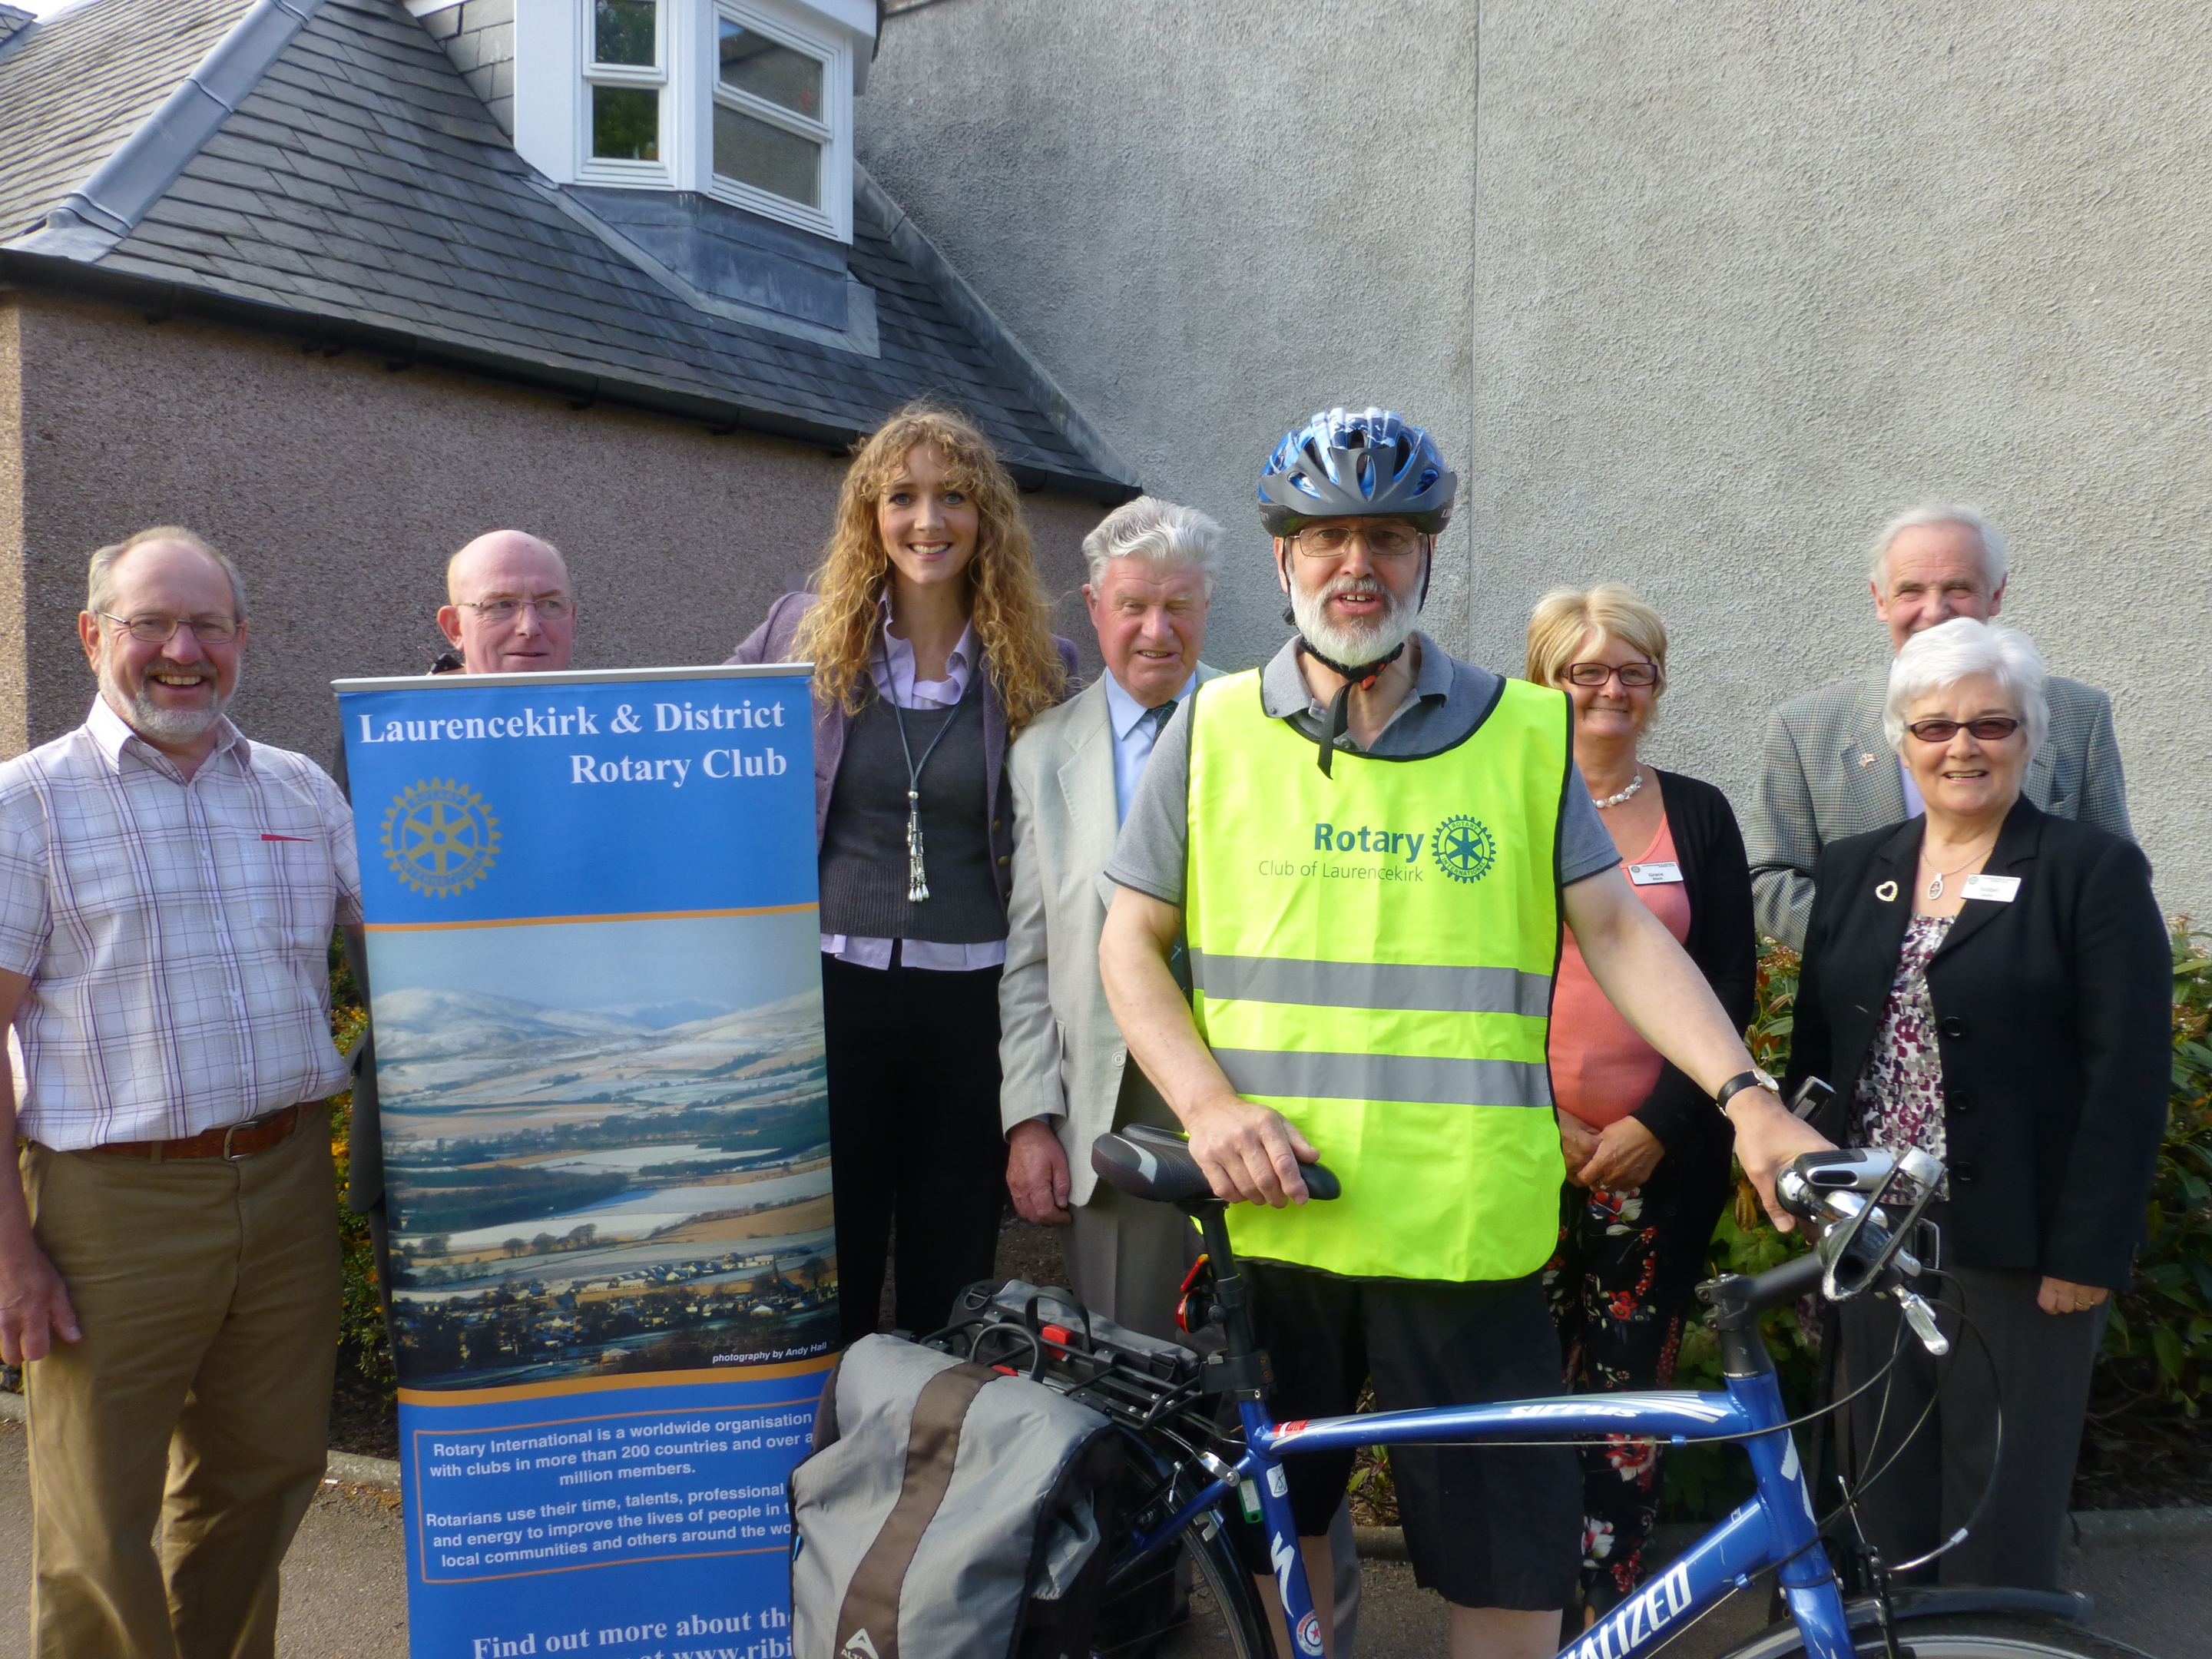 Mike Robson, president of the Laurencekirk Rotary Club, is gearing up for the Rotary Cycle